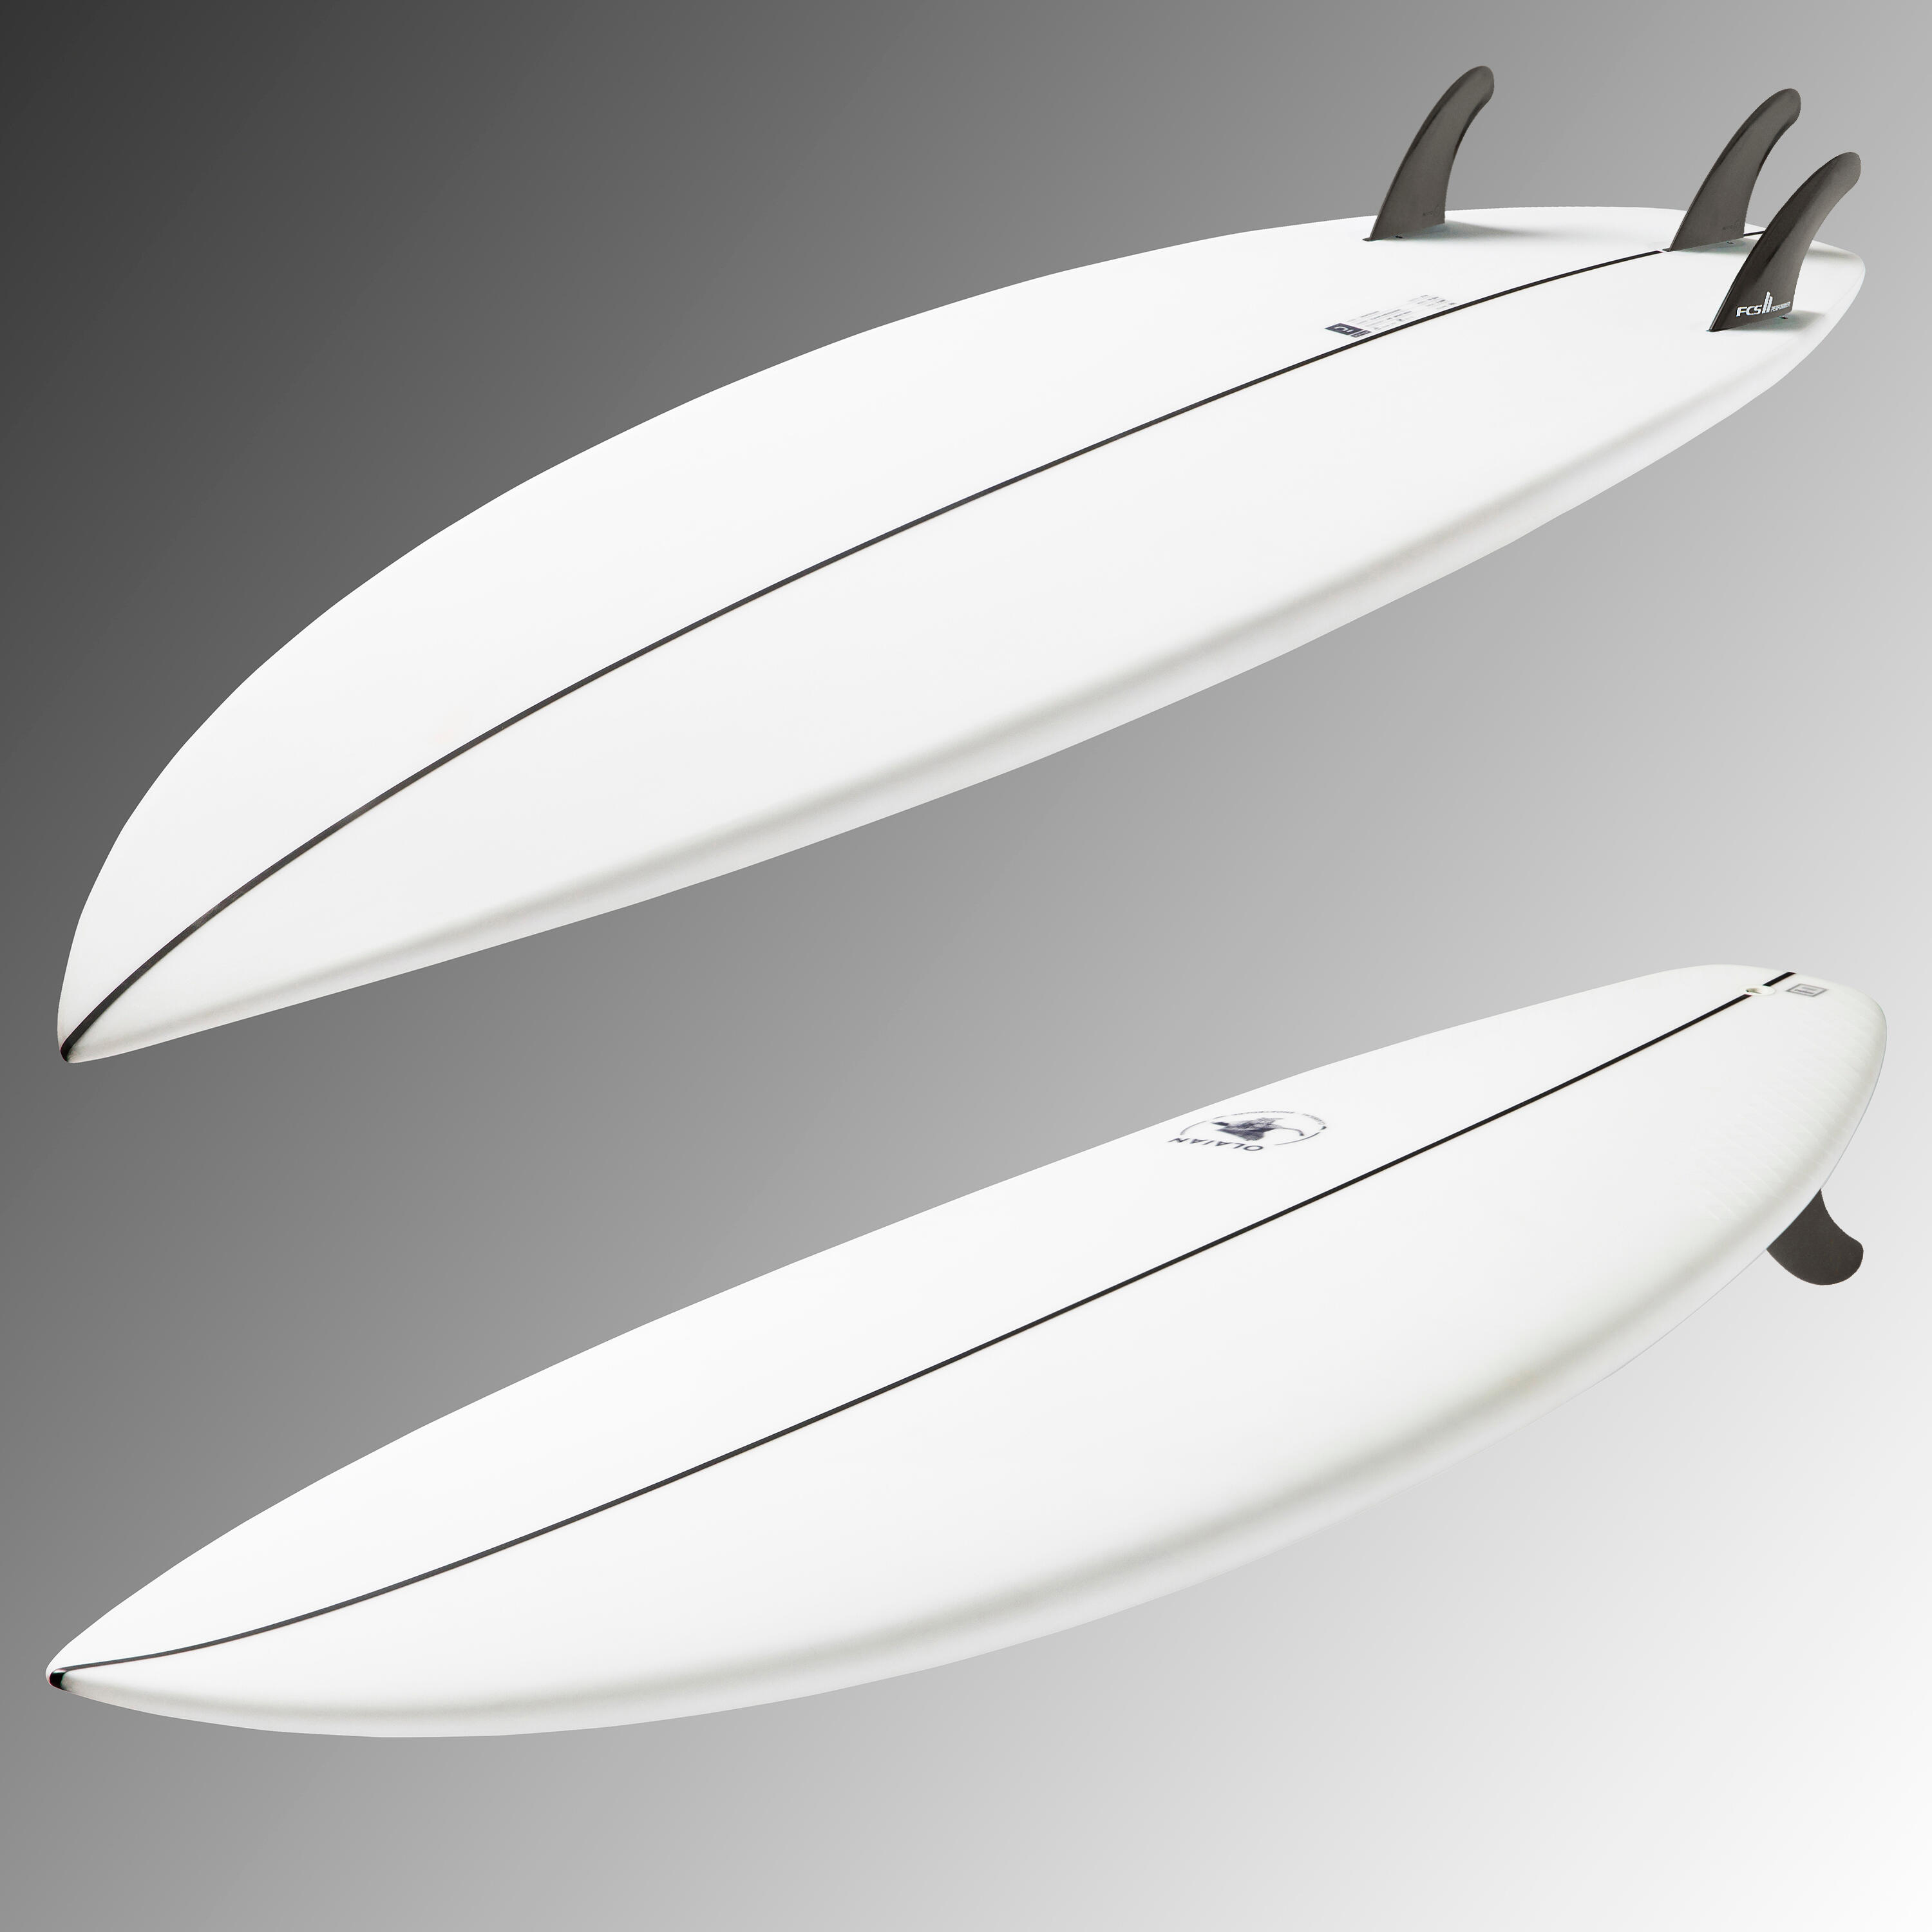 SHORTBOARD 900 5'10" 30 L. Supplied with 3 FCS2 fins 5/19